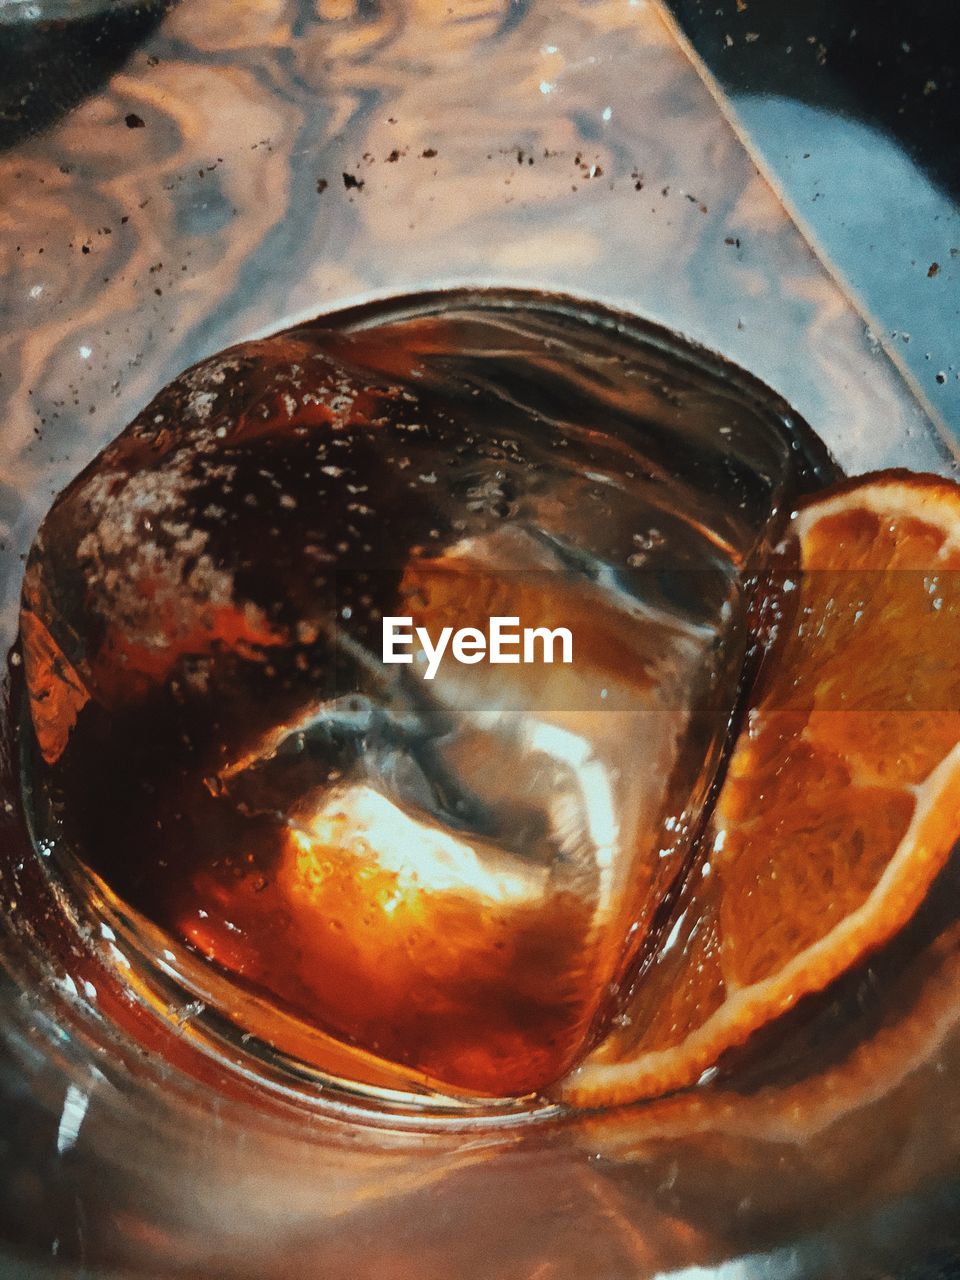 A glass of whiskey with an ice cube and an orange slice